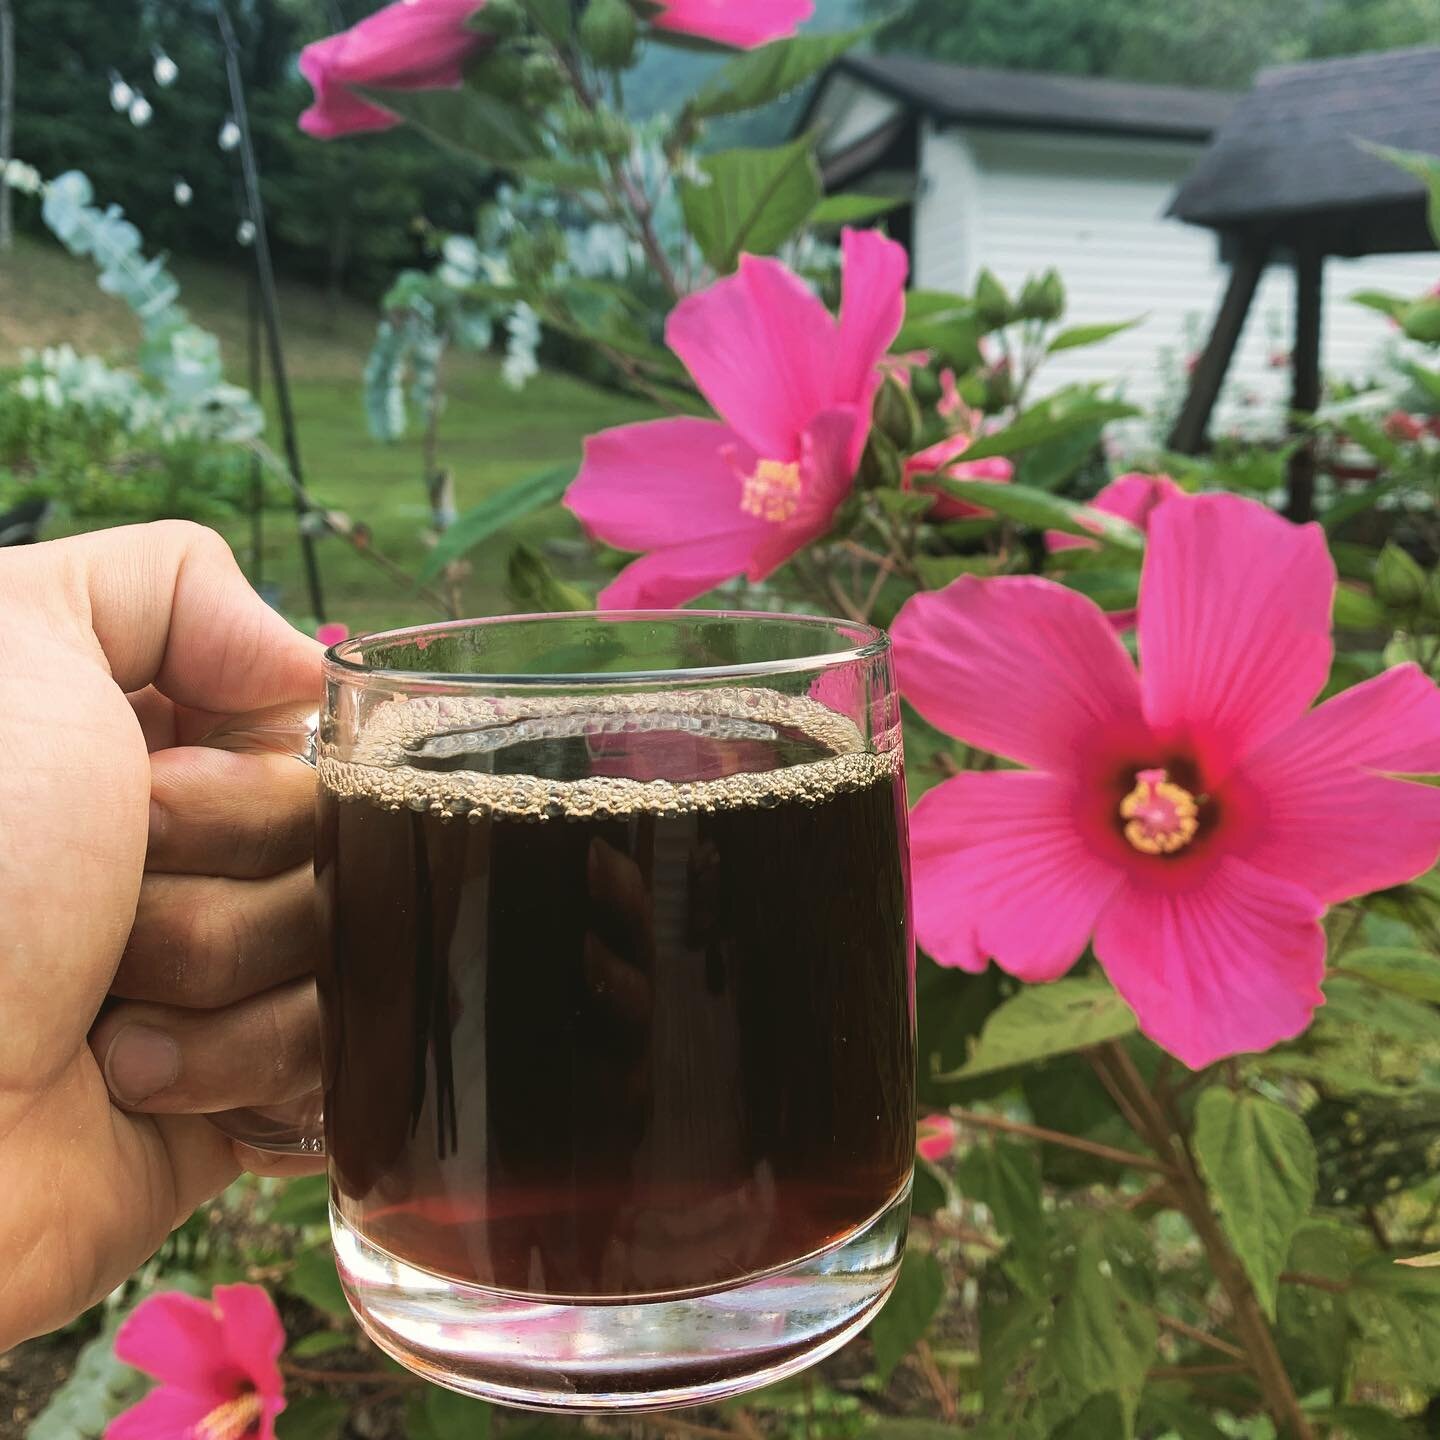 Lincoln Road Colombian roast with a view 🌺 show us your coffee view this morning! ☕️🌄 head to the link in our bio to have LR shipped to your door 📦🚪#LincolnRoadRoastery #DoGoodThings